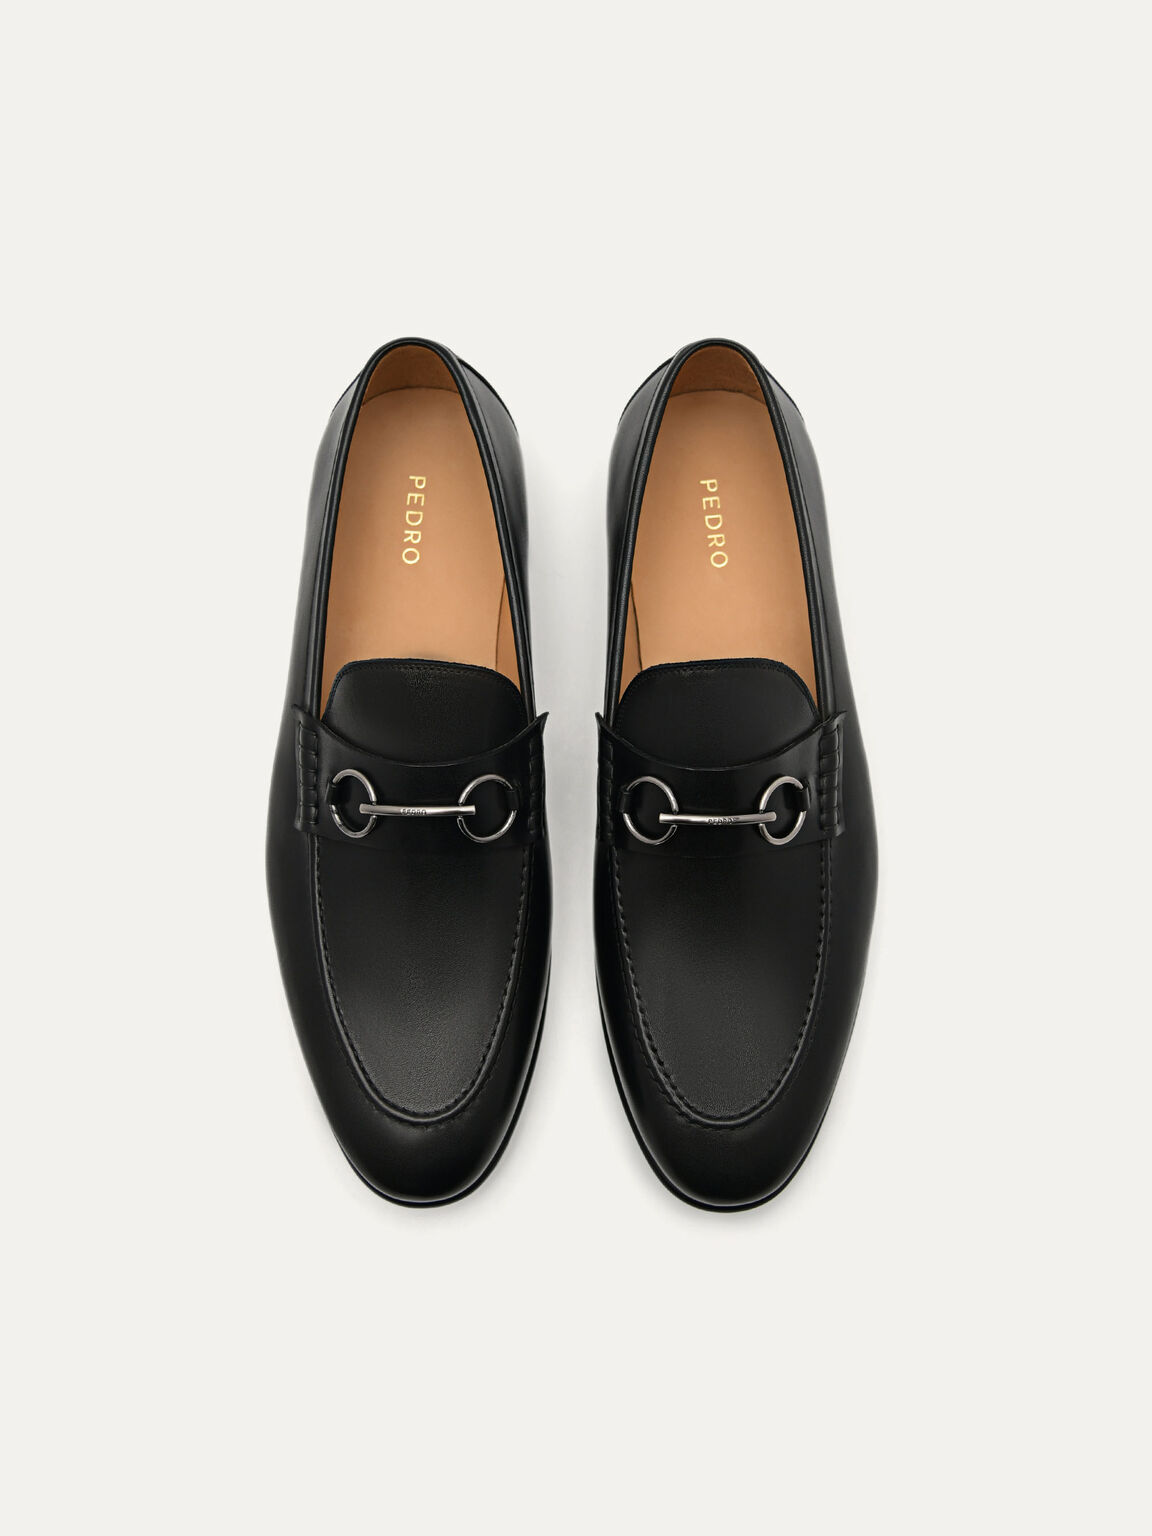 Gable Leather Loafers, Black